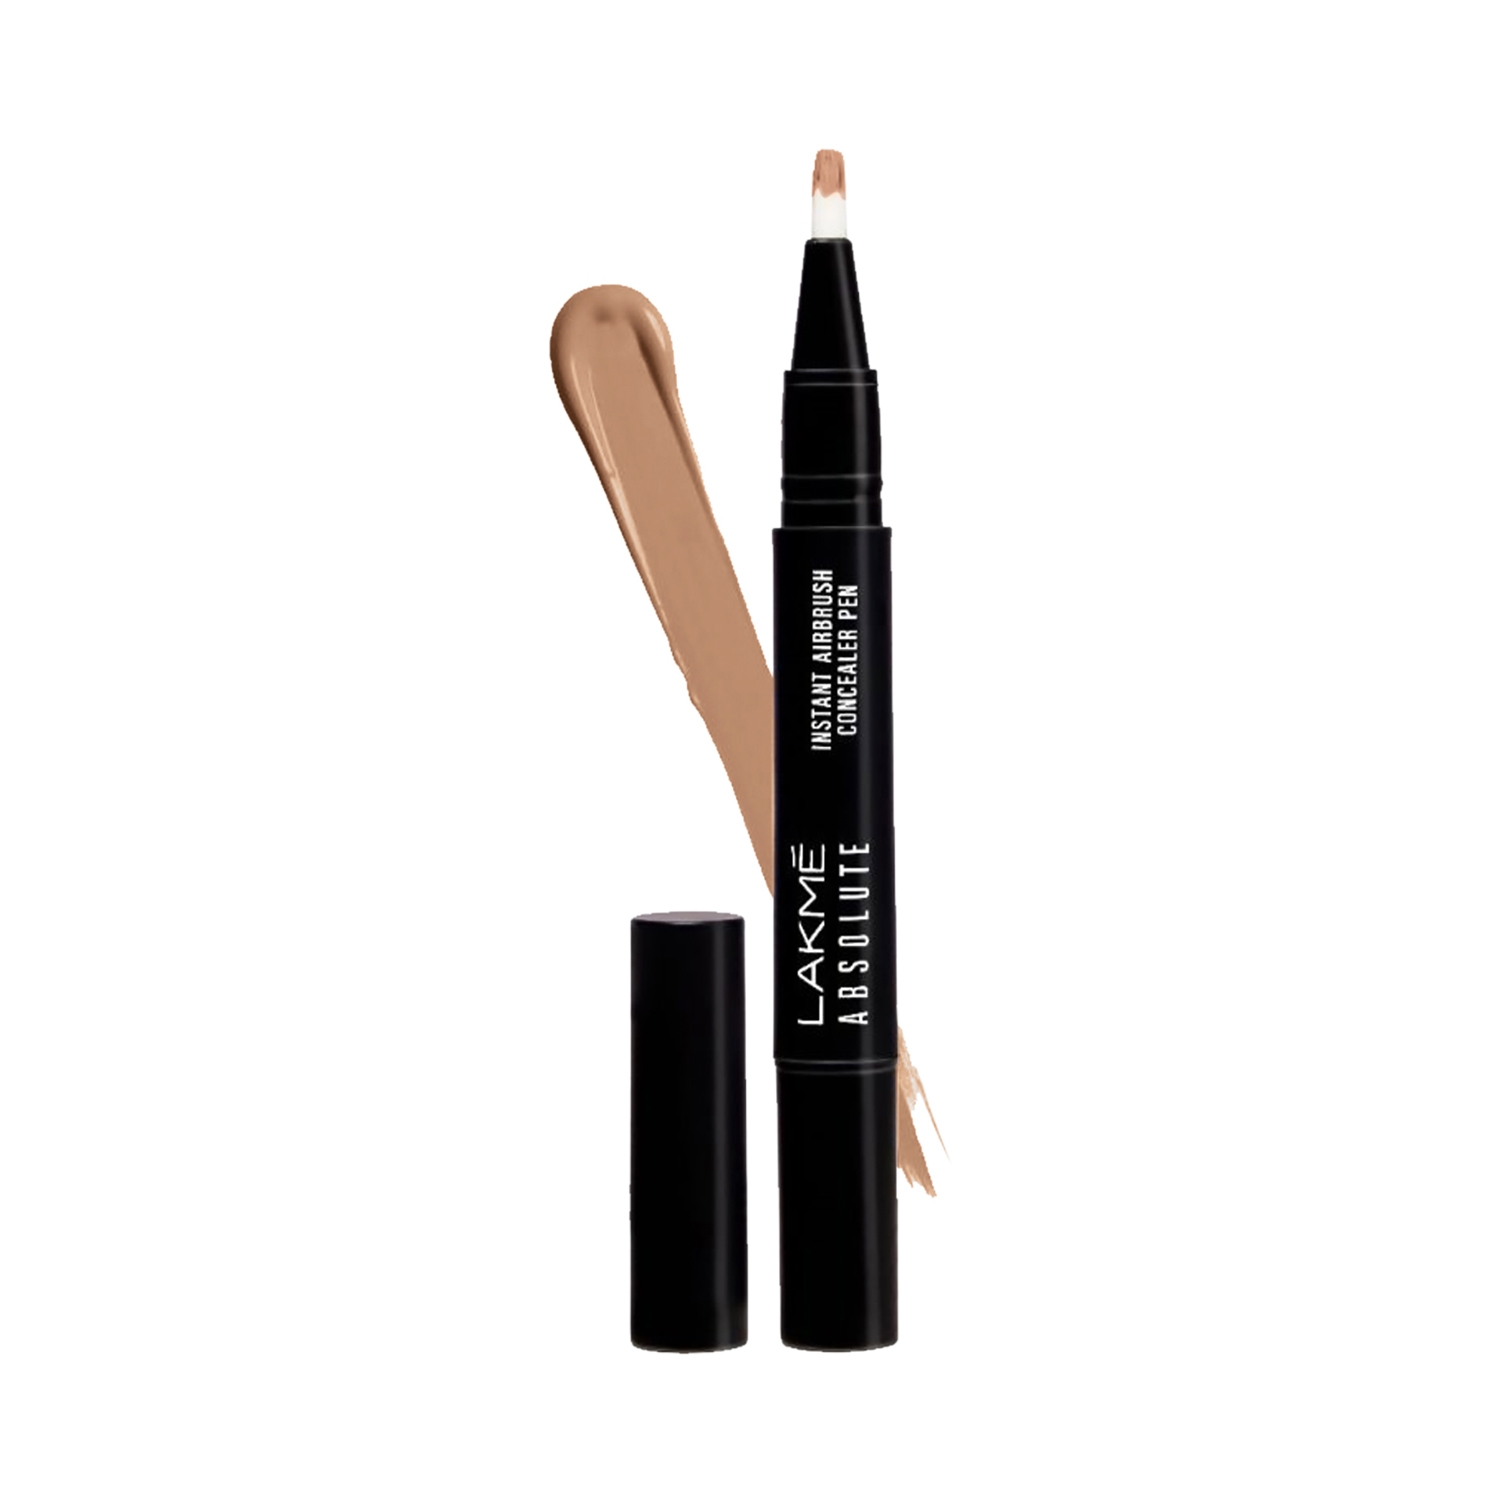 Lakme | Lakme Absolute Instant Airbrush Concealer Pen - Sand (1.8g)